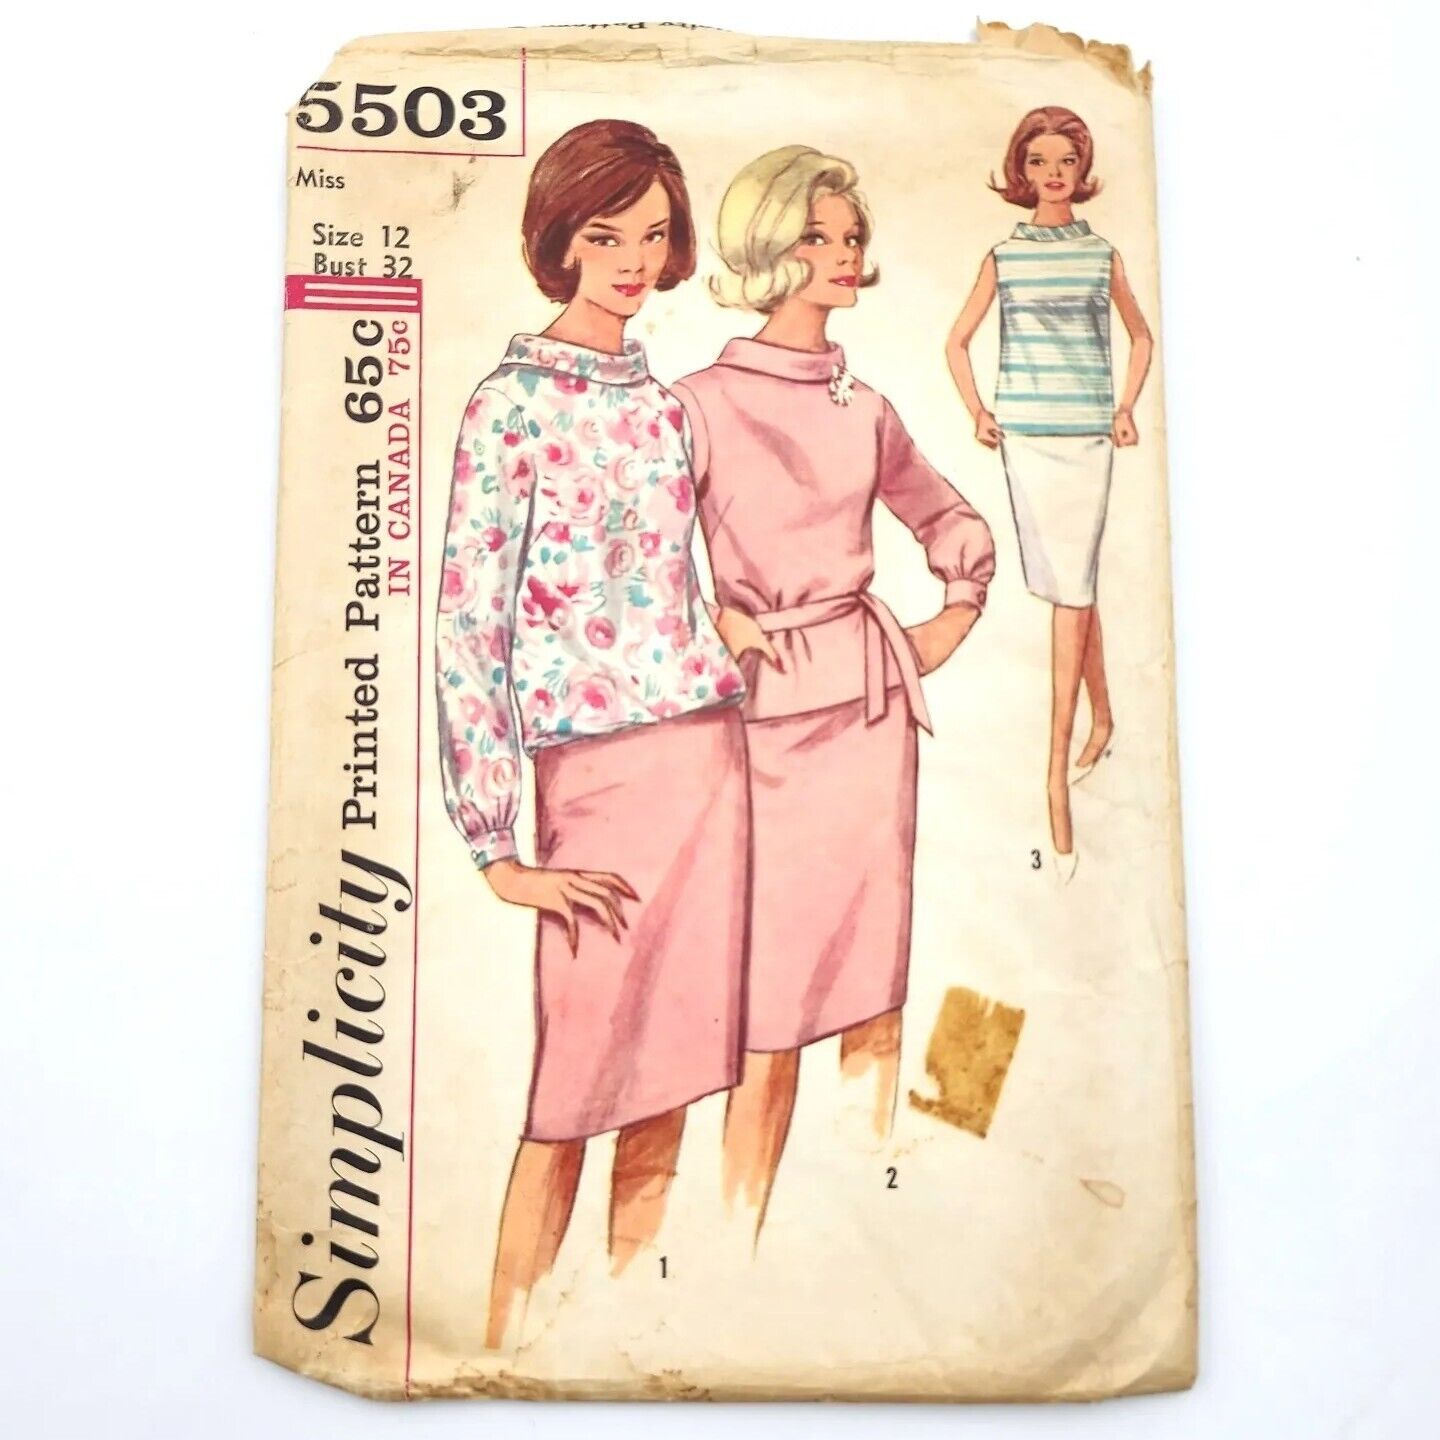 Vintage Simplicity 1960s Two Piece Dress Sewing Pattern #5503  Size 12 Bust 32